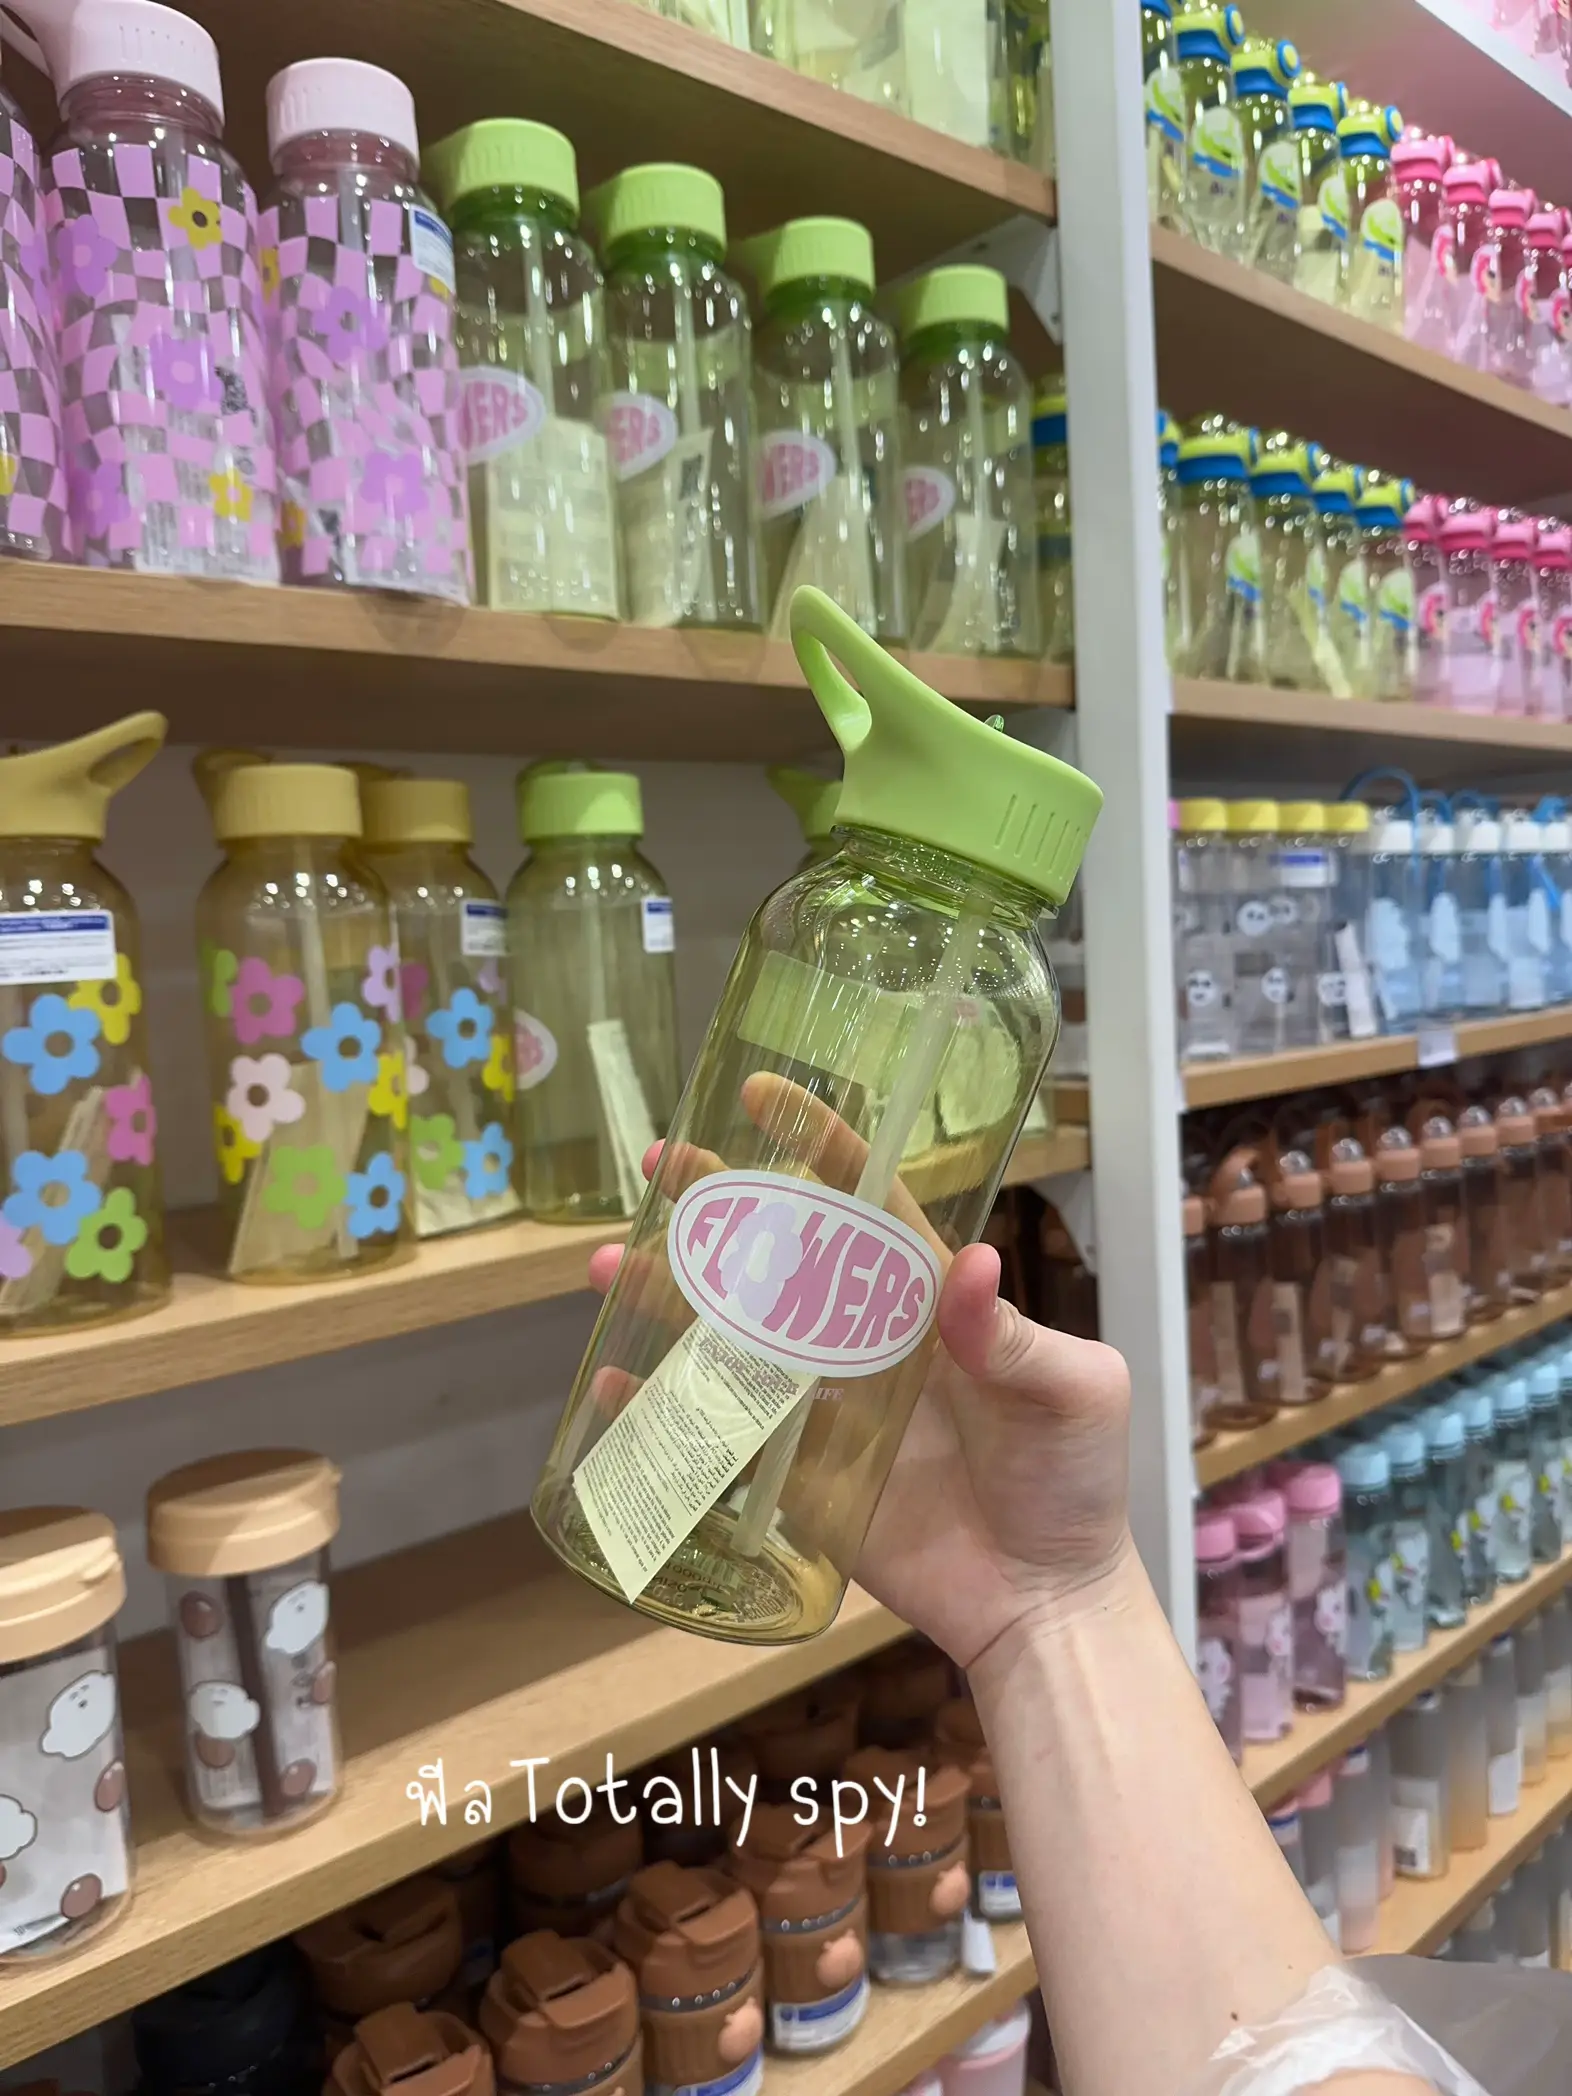 Miniso, must the glass be so cute?, Gallery posted by Fromfattofit